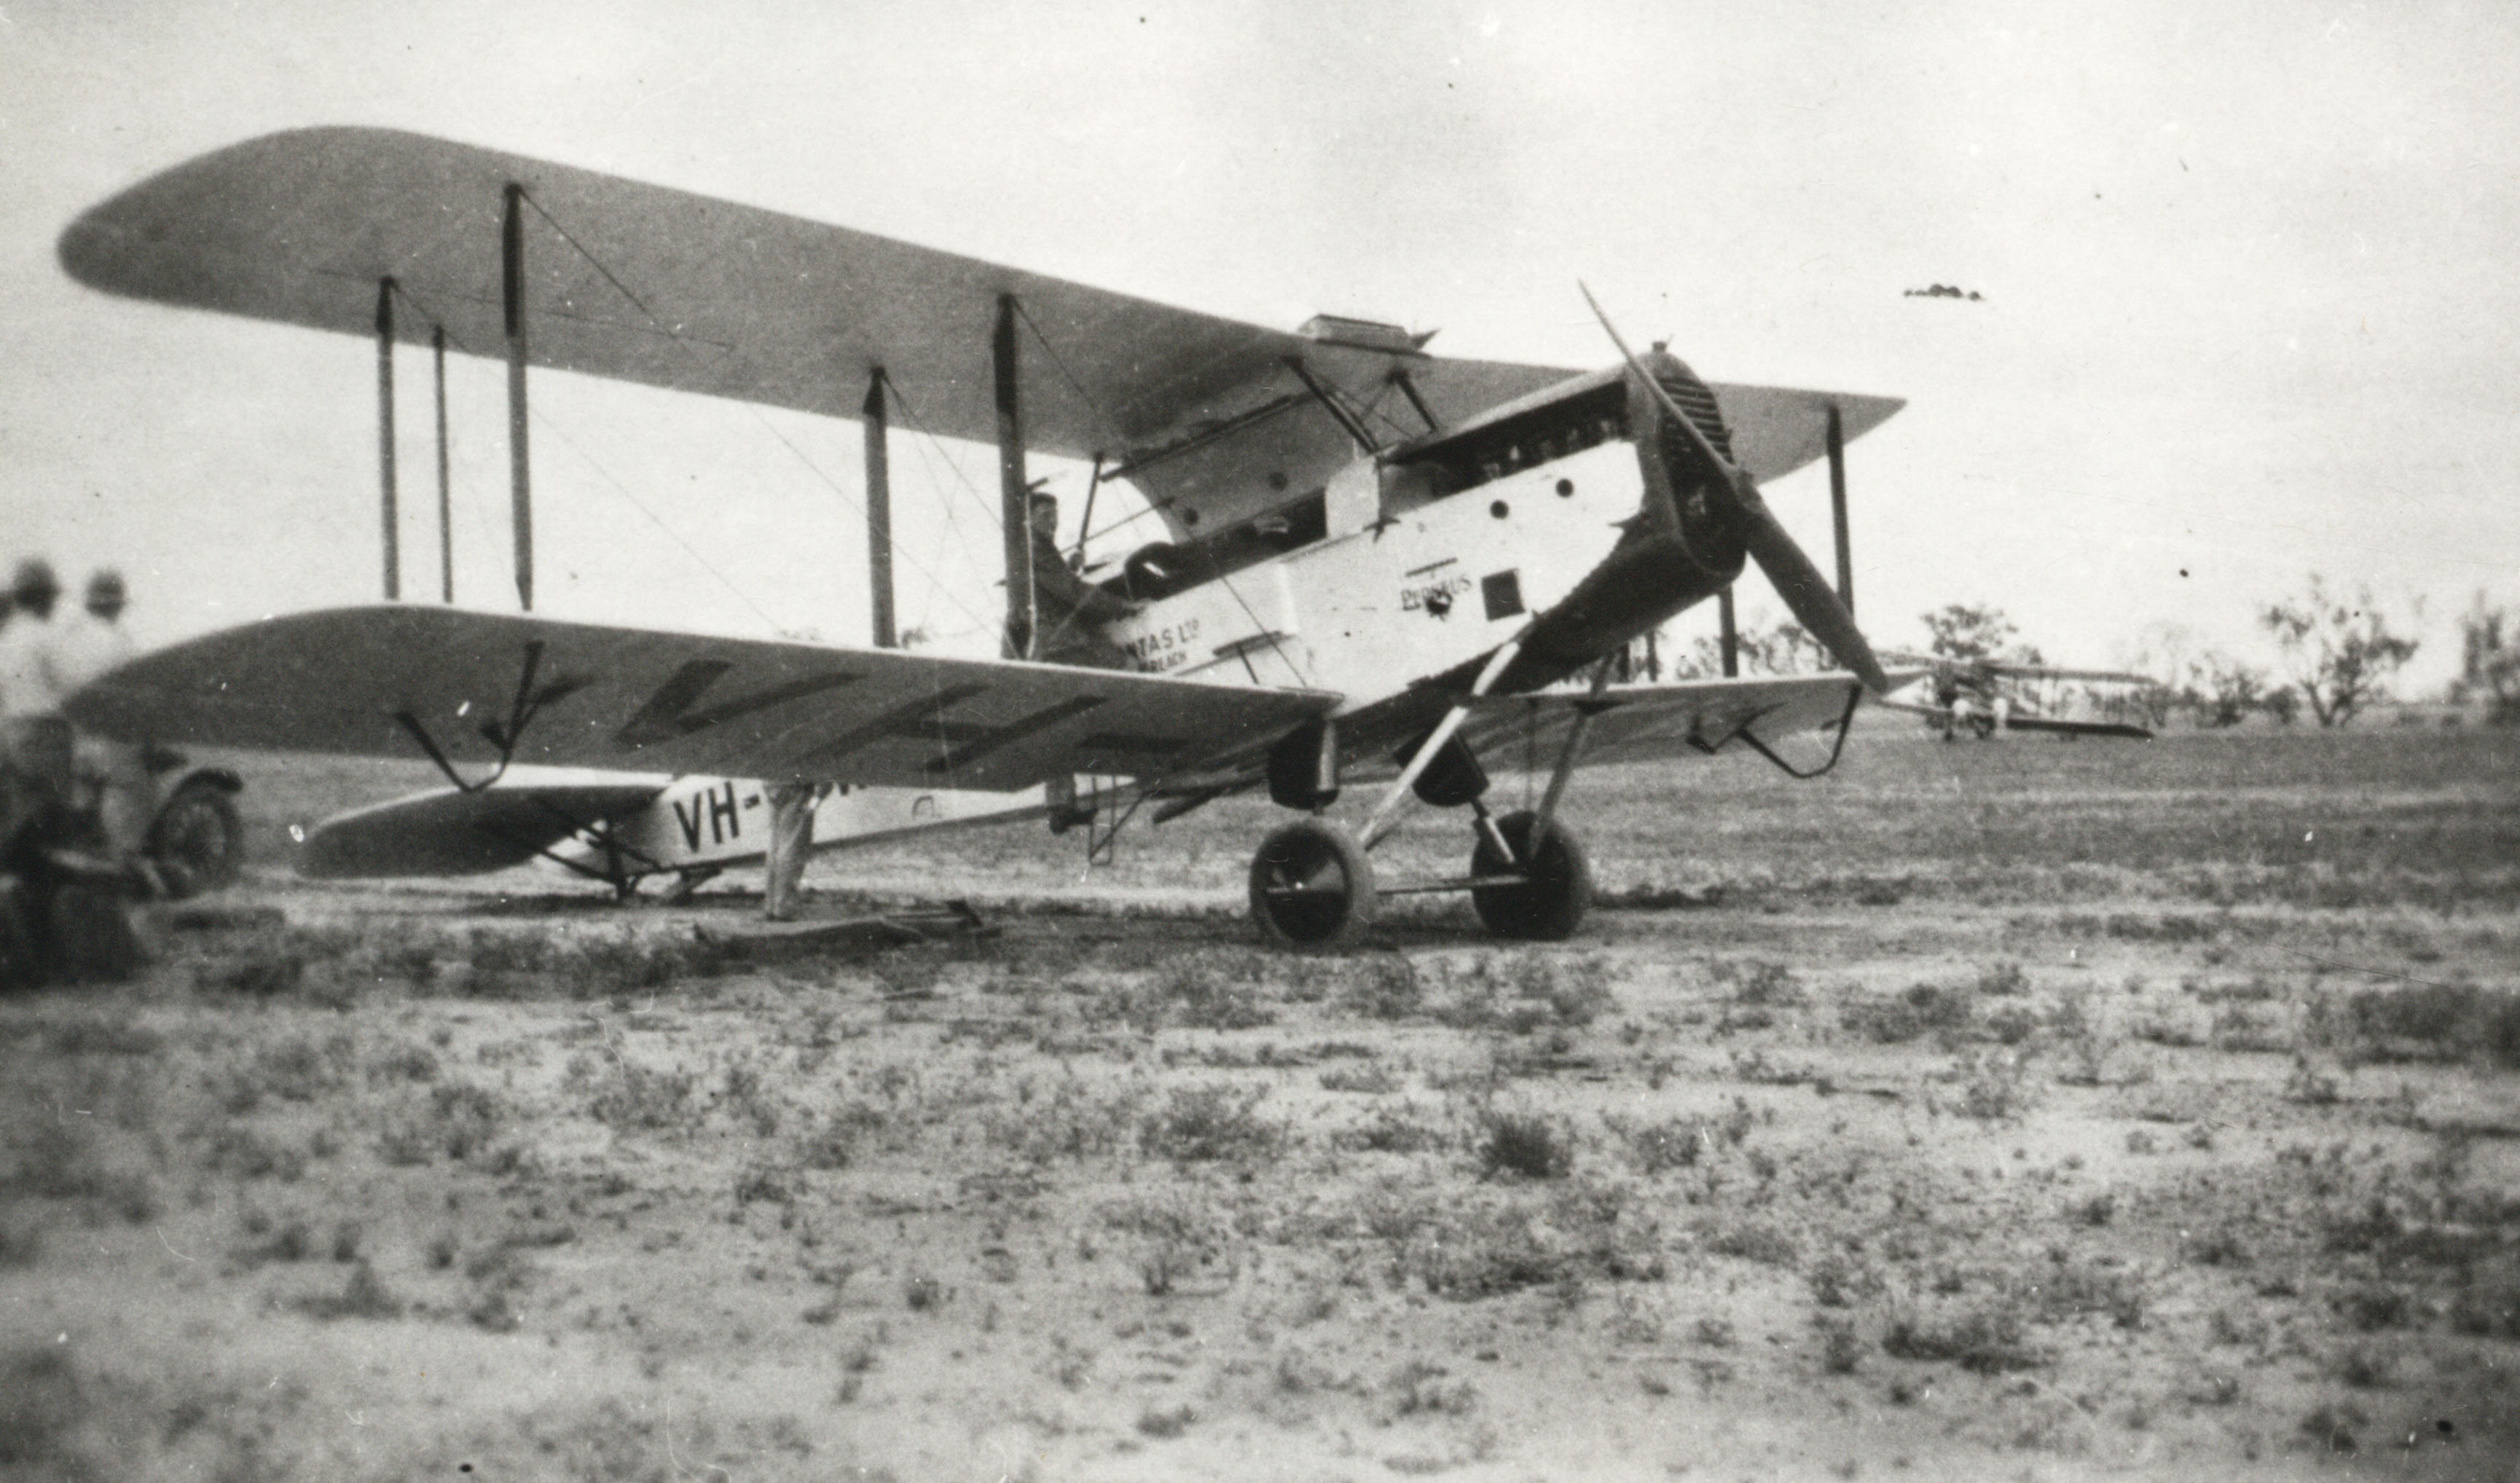 Sir Hudson Fysh in the Qantas airplane 'Perseus' on the Corona Station runway, Queensland, c. 1930 (68-156). Photographer - Thomas Armstrong.